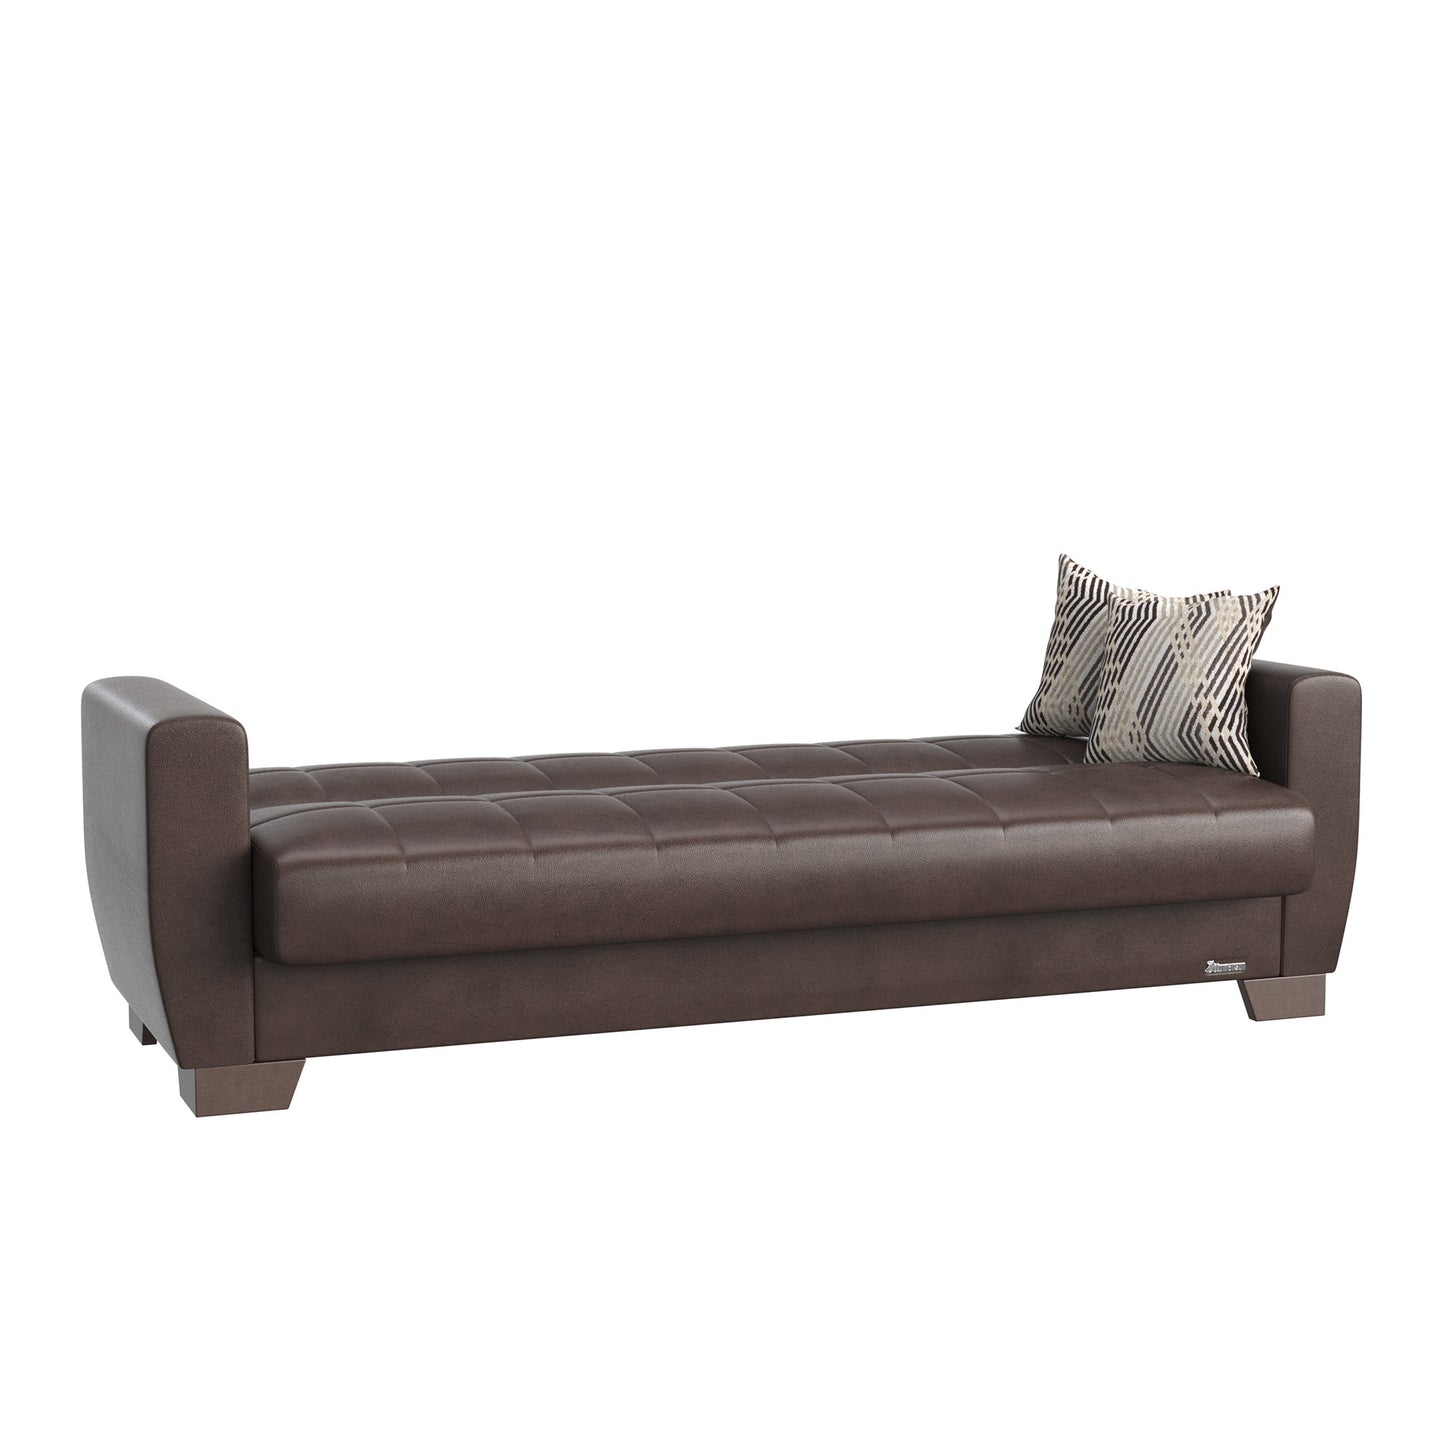 84" Brown Faux Leather Sleeper Sleeper Sofa With Two Toss Pillows